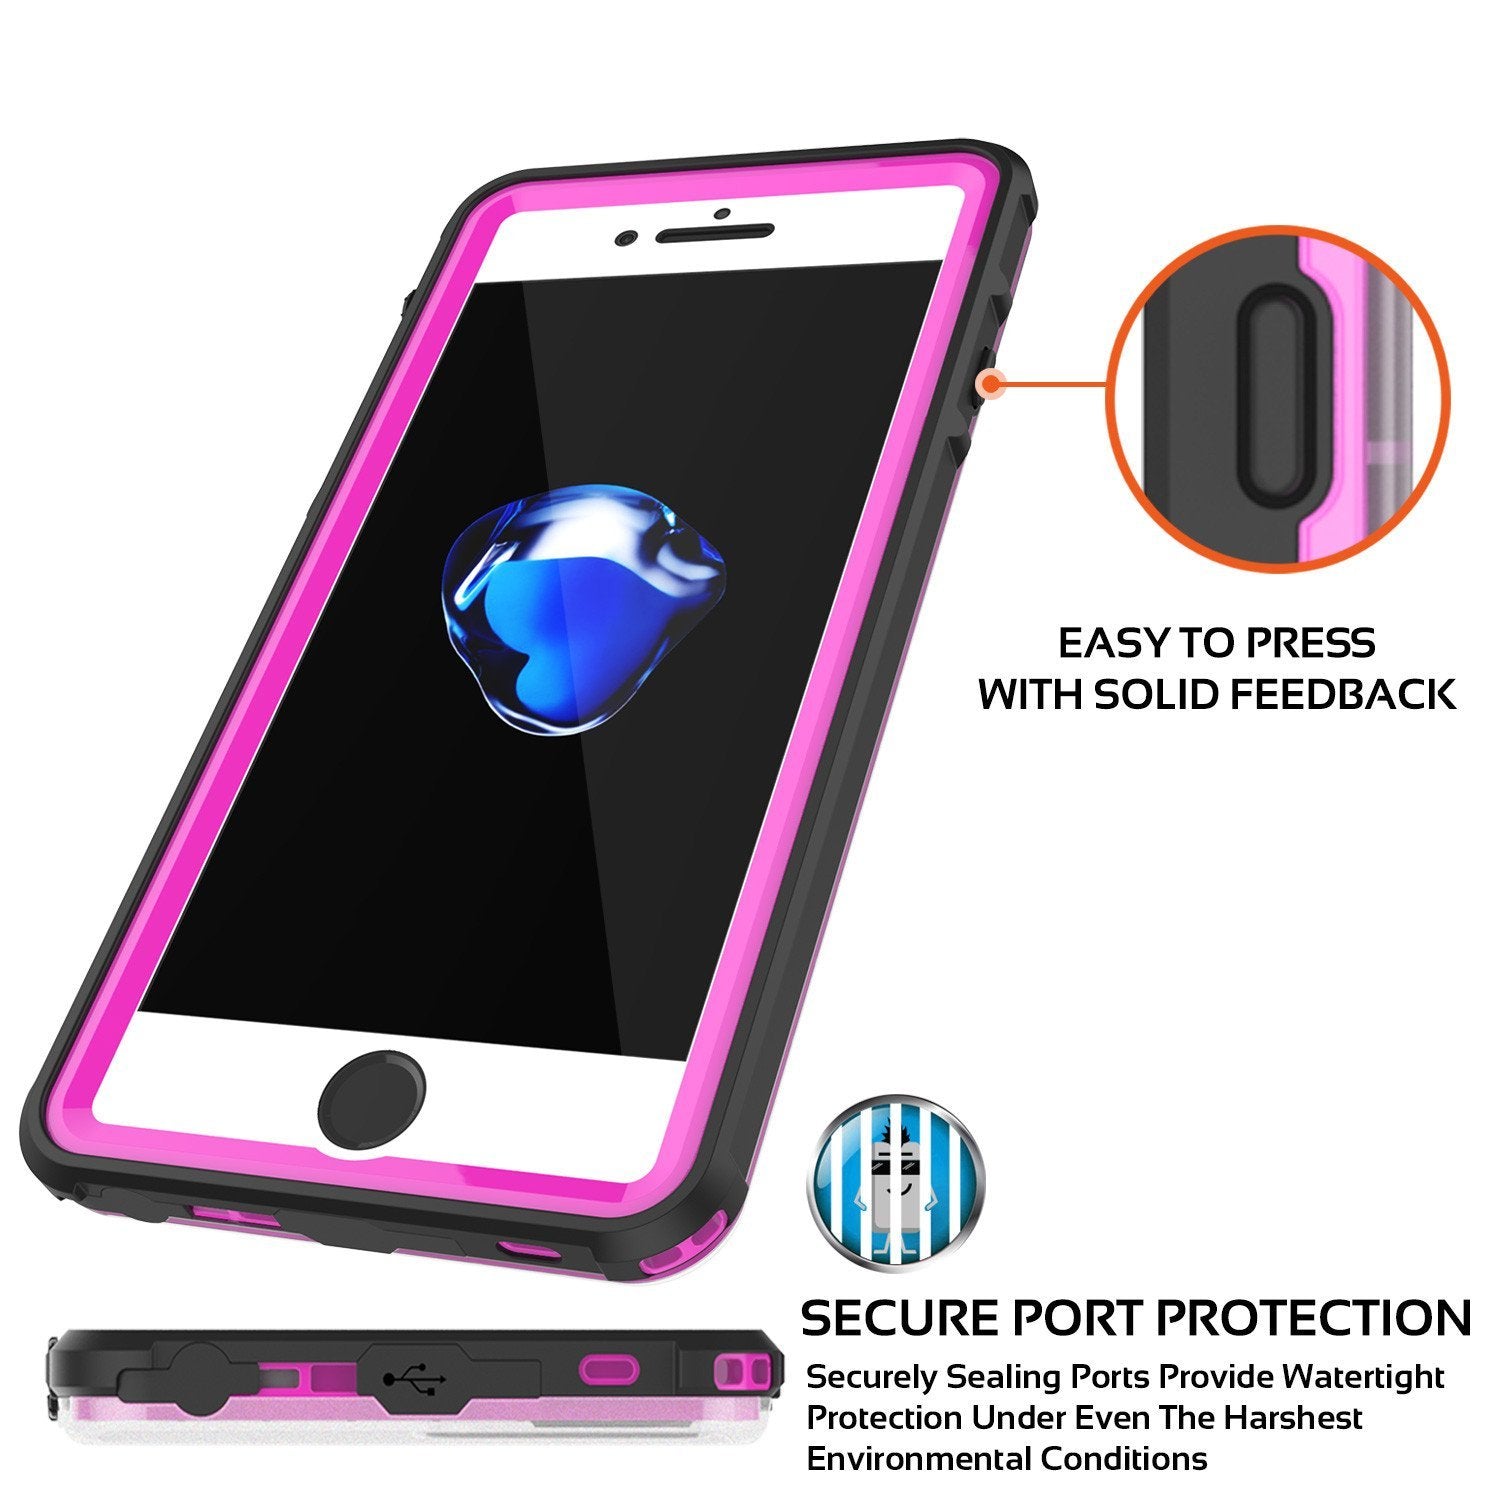 iPhone 8+ Plus Waterproof Case, PUNKcase CRYSTAL Pink W/ Attached Screen Protector  | Warranty